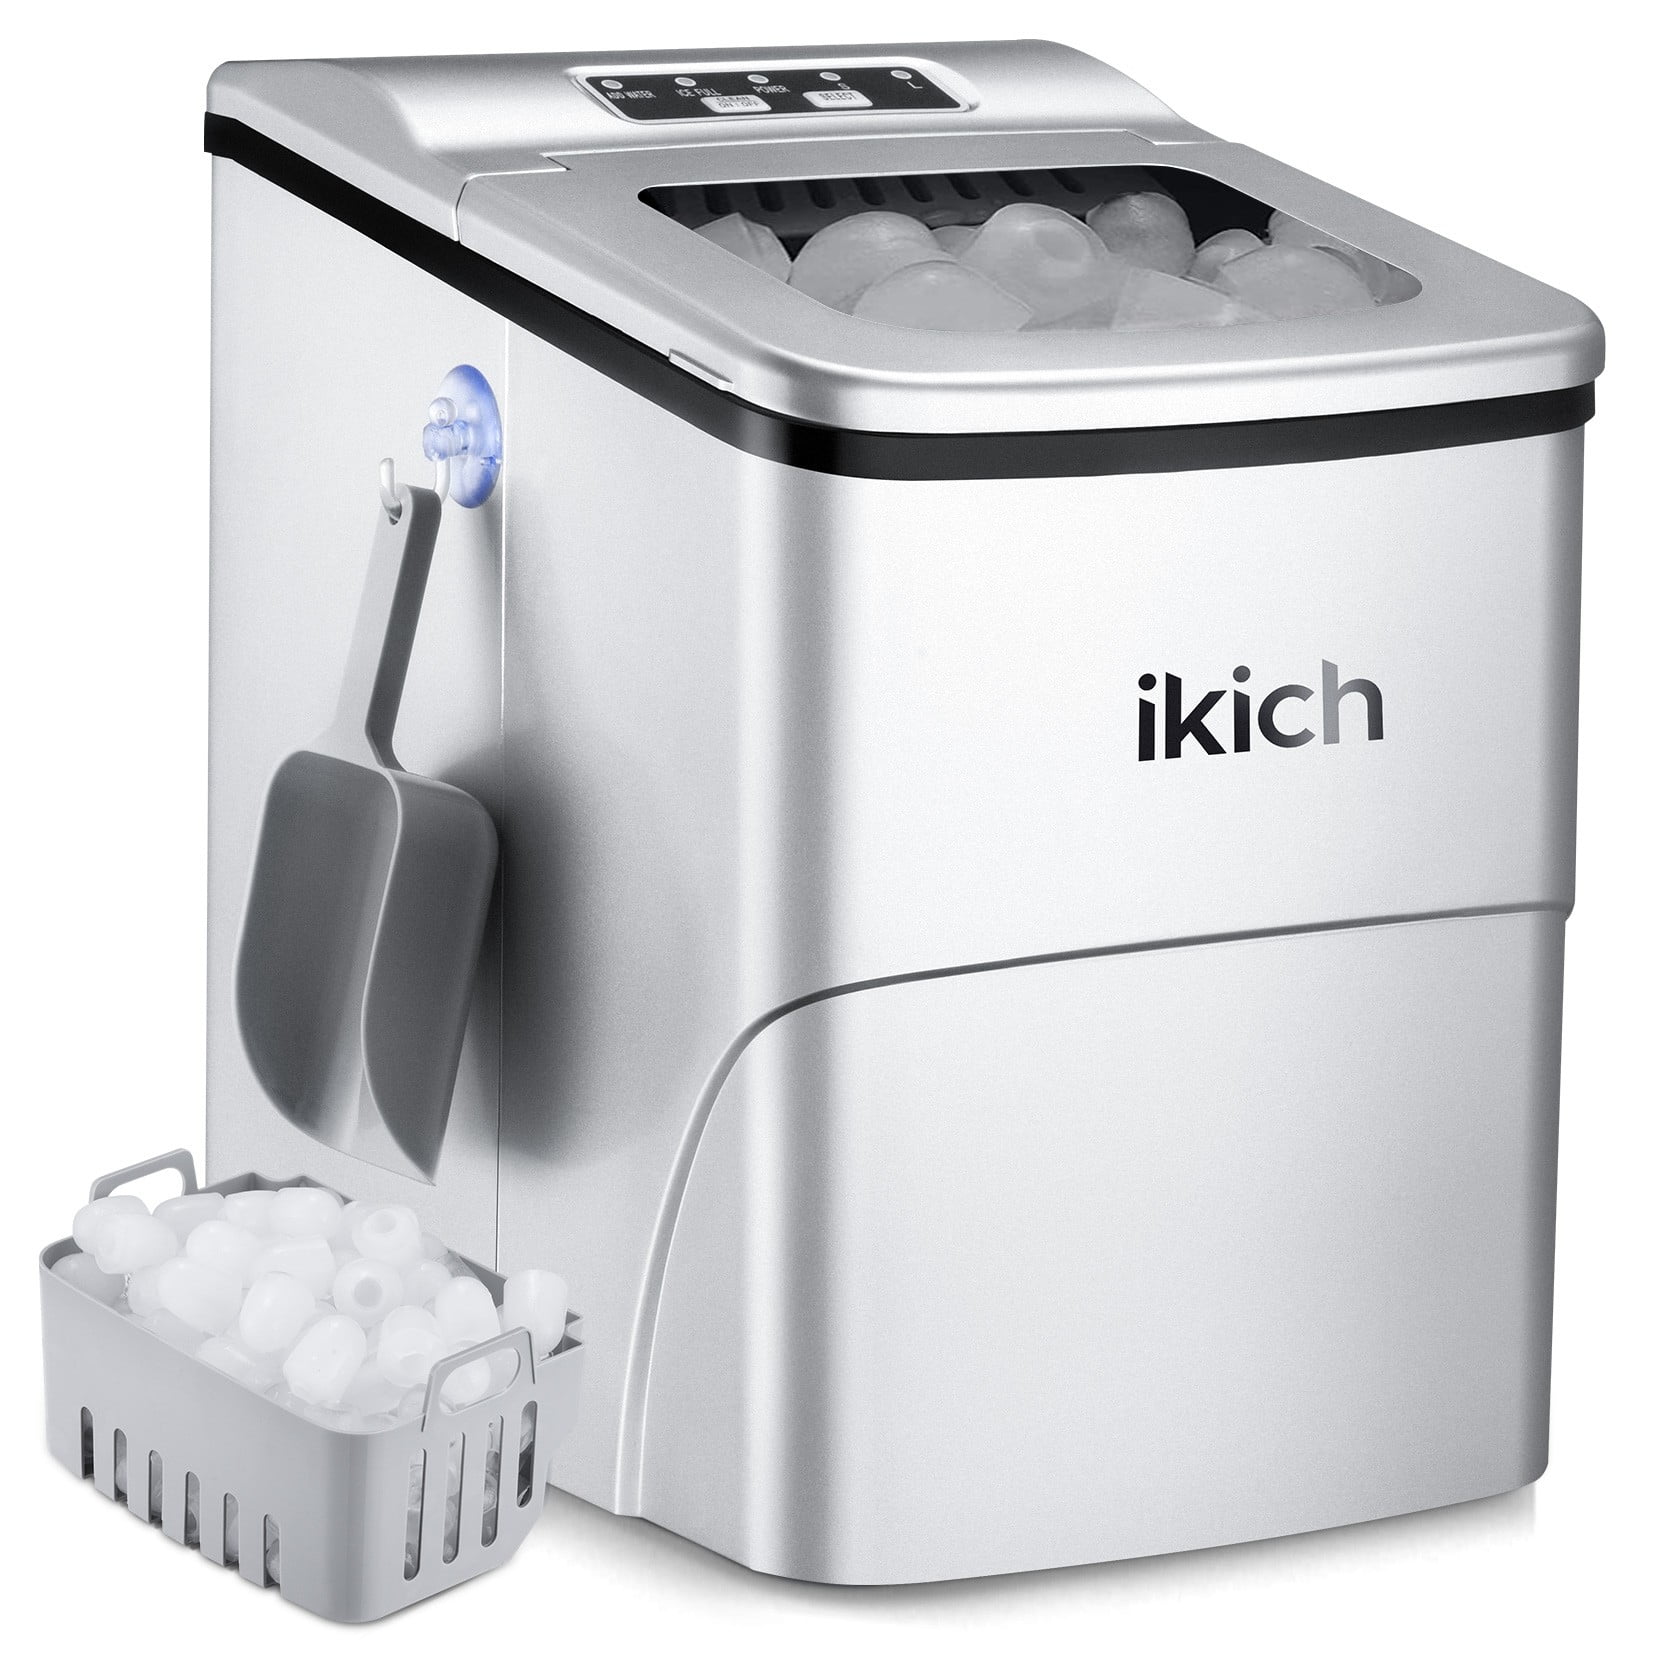 Electric Ice Maker 2L with Ice Scoop and Basket Ice Cubes Ready in 6 Mins Make 26 lbs Ice in 24 Hrs LED Display Perfect for Parties Mixed Drinks IKICH Ice Maker Machine Counter Top Home 